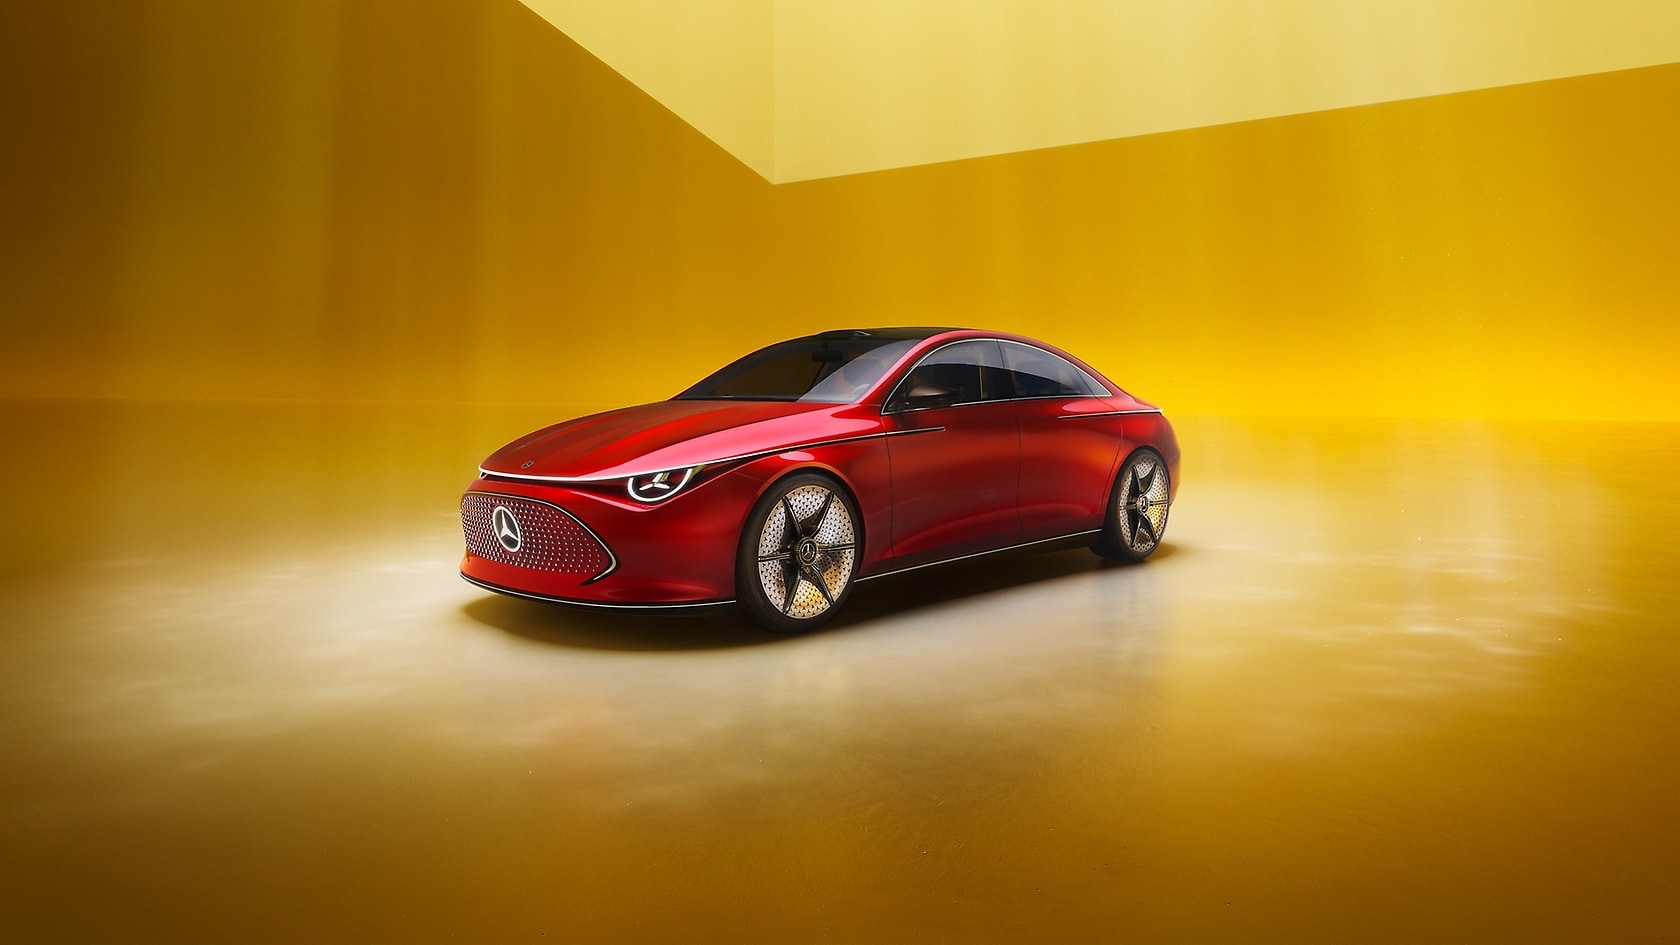 Mercedes-Benz Concept CLA Class: Represents the electric future of desire. at the gateway to Mercedes-Benz.